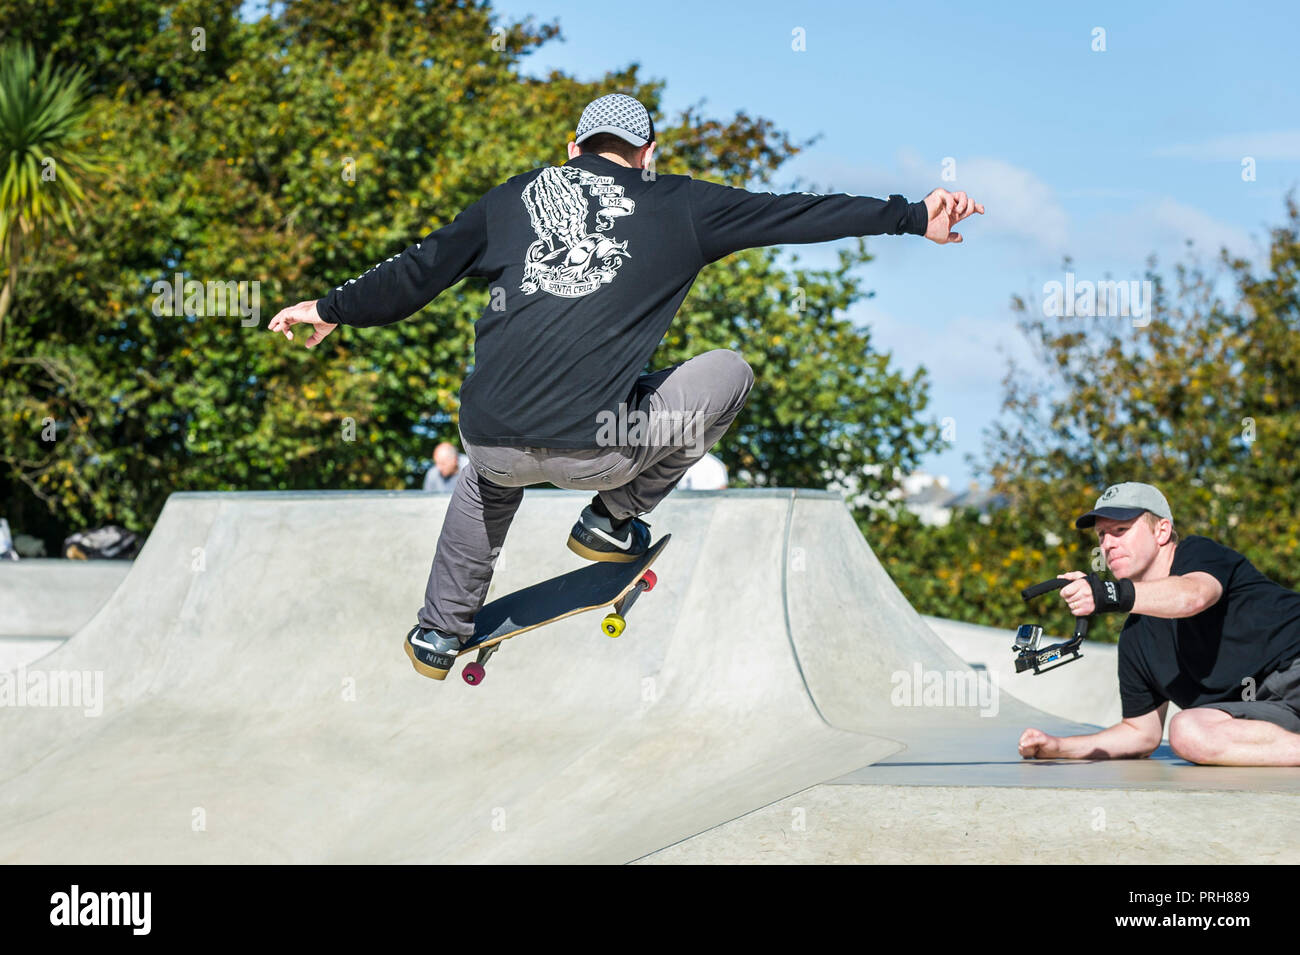 A skateboarder being filmed performing an aerial trick at Concrete Waves Skateboarding Park in Newquay in Cornwall. Stock Photo